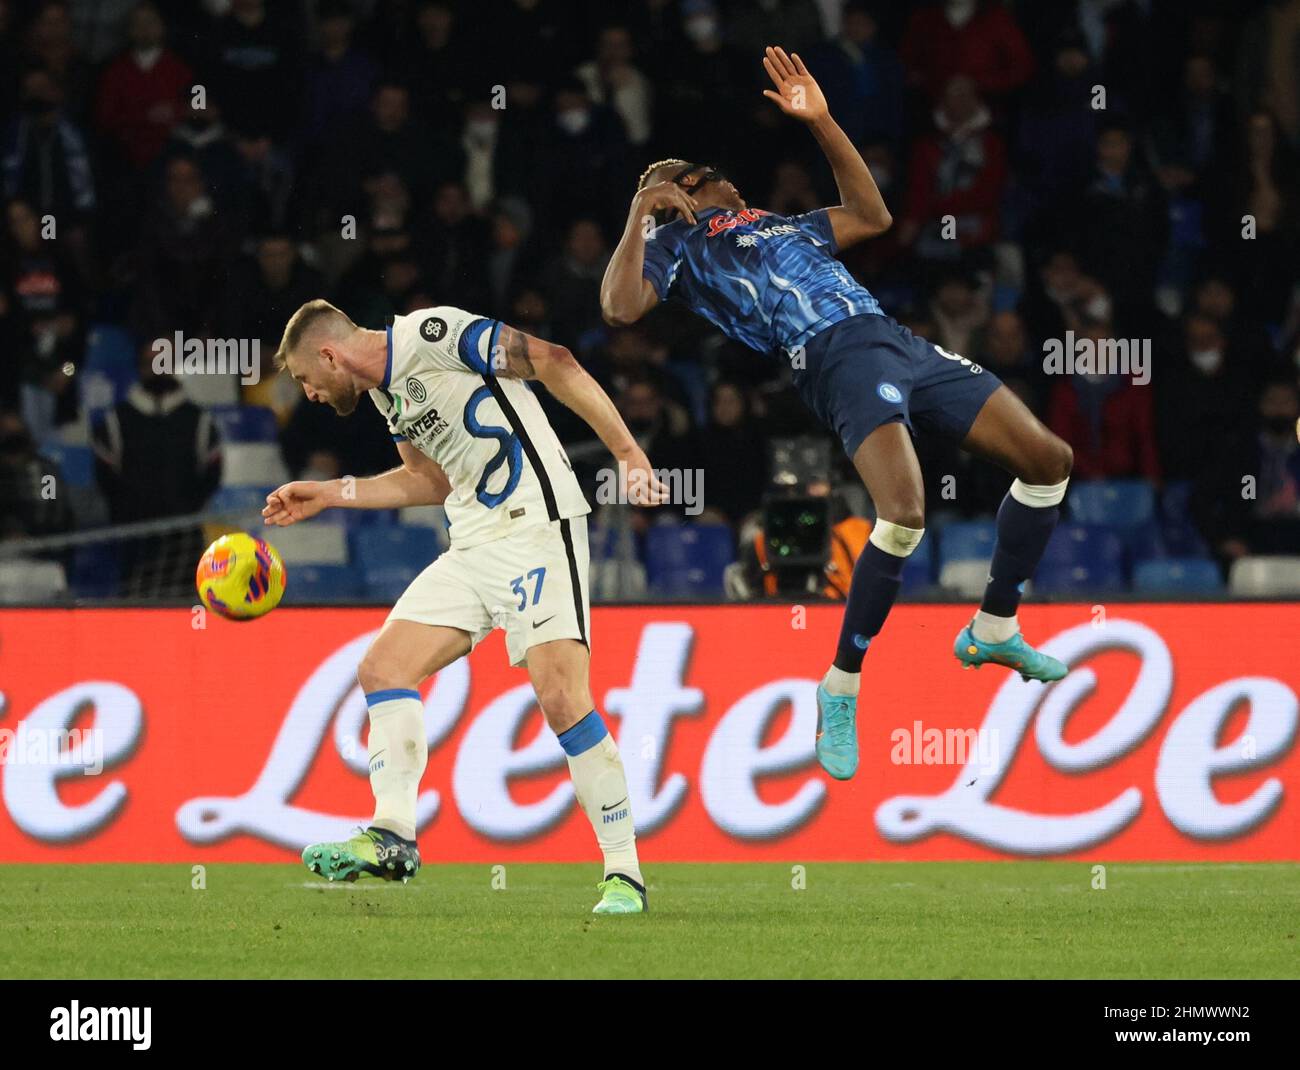 Naples, Campania, Italy. 12th Feb, 2022. Inter Milan Skriniar fouls Victor  Osimhen of Napoli in the penalty area but the referee does not give a  penalty.During the Italian Serie A Football match